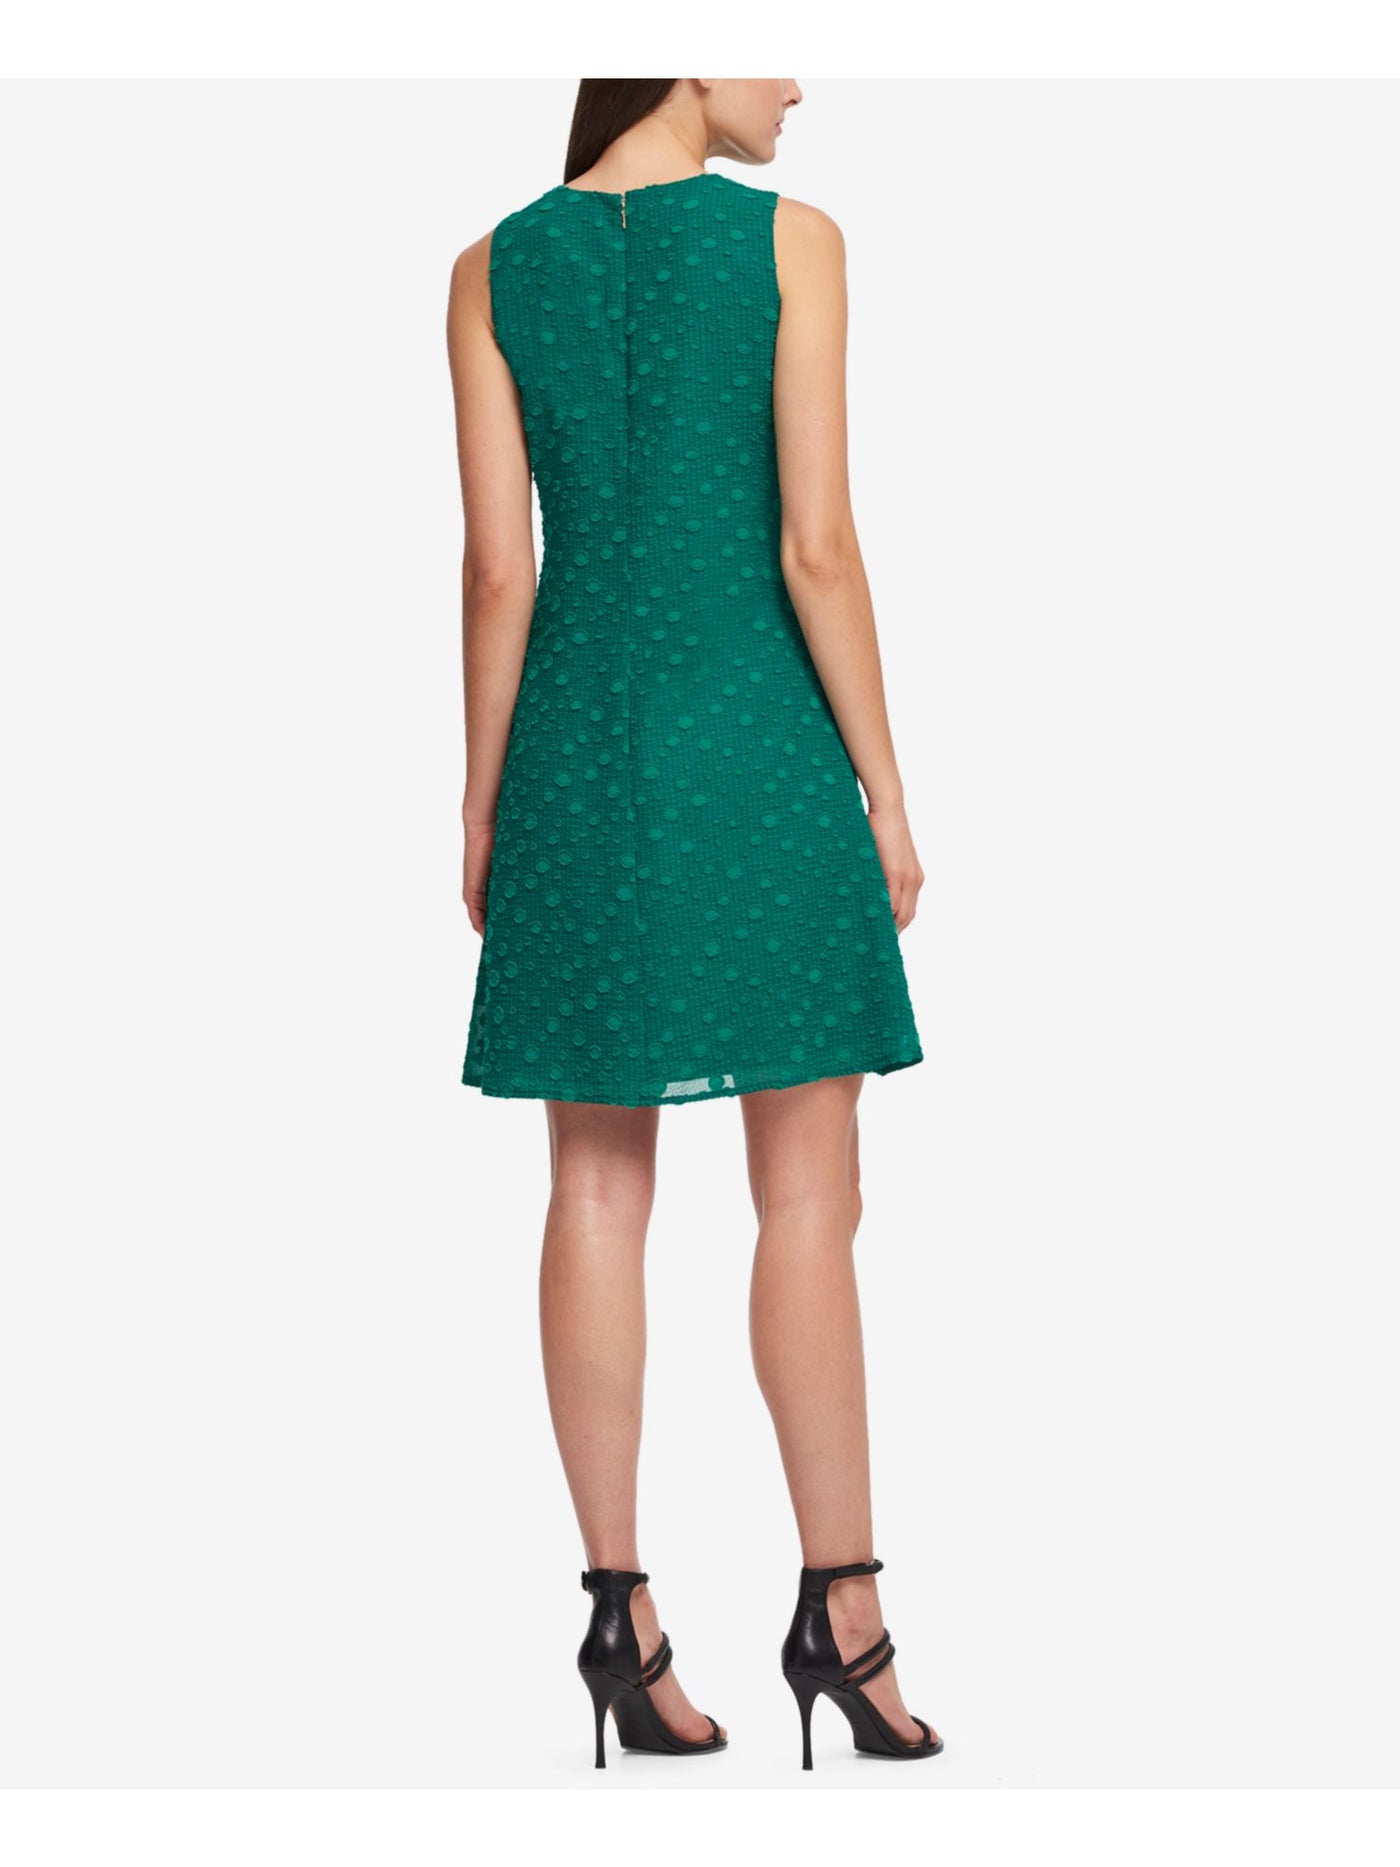 DKNY Womens Green Lace Textured Polka Dot Sleeveless Square Neck Above The Knee Cocktail Fit + Flare Dress 4